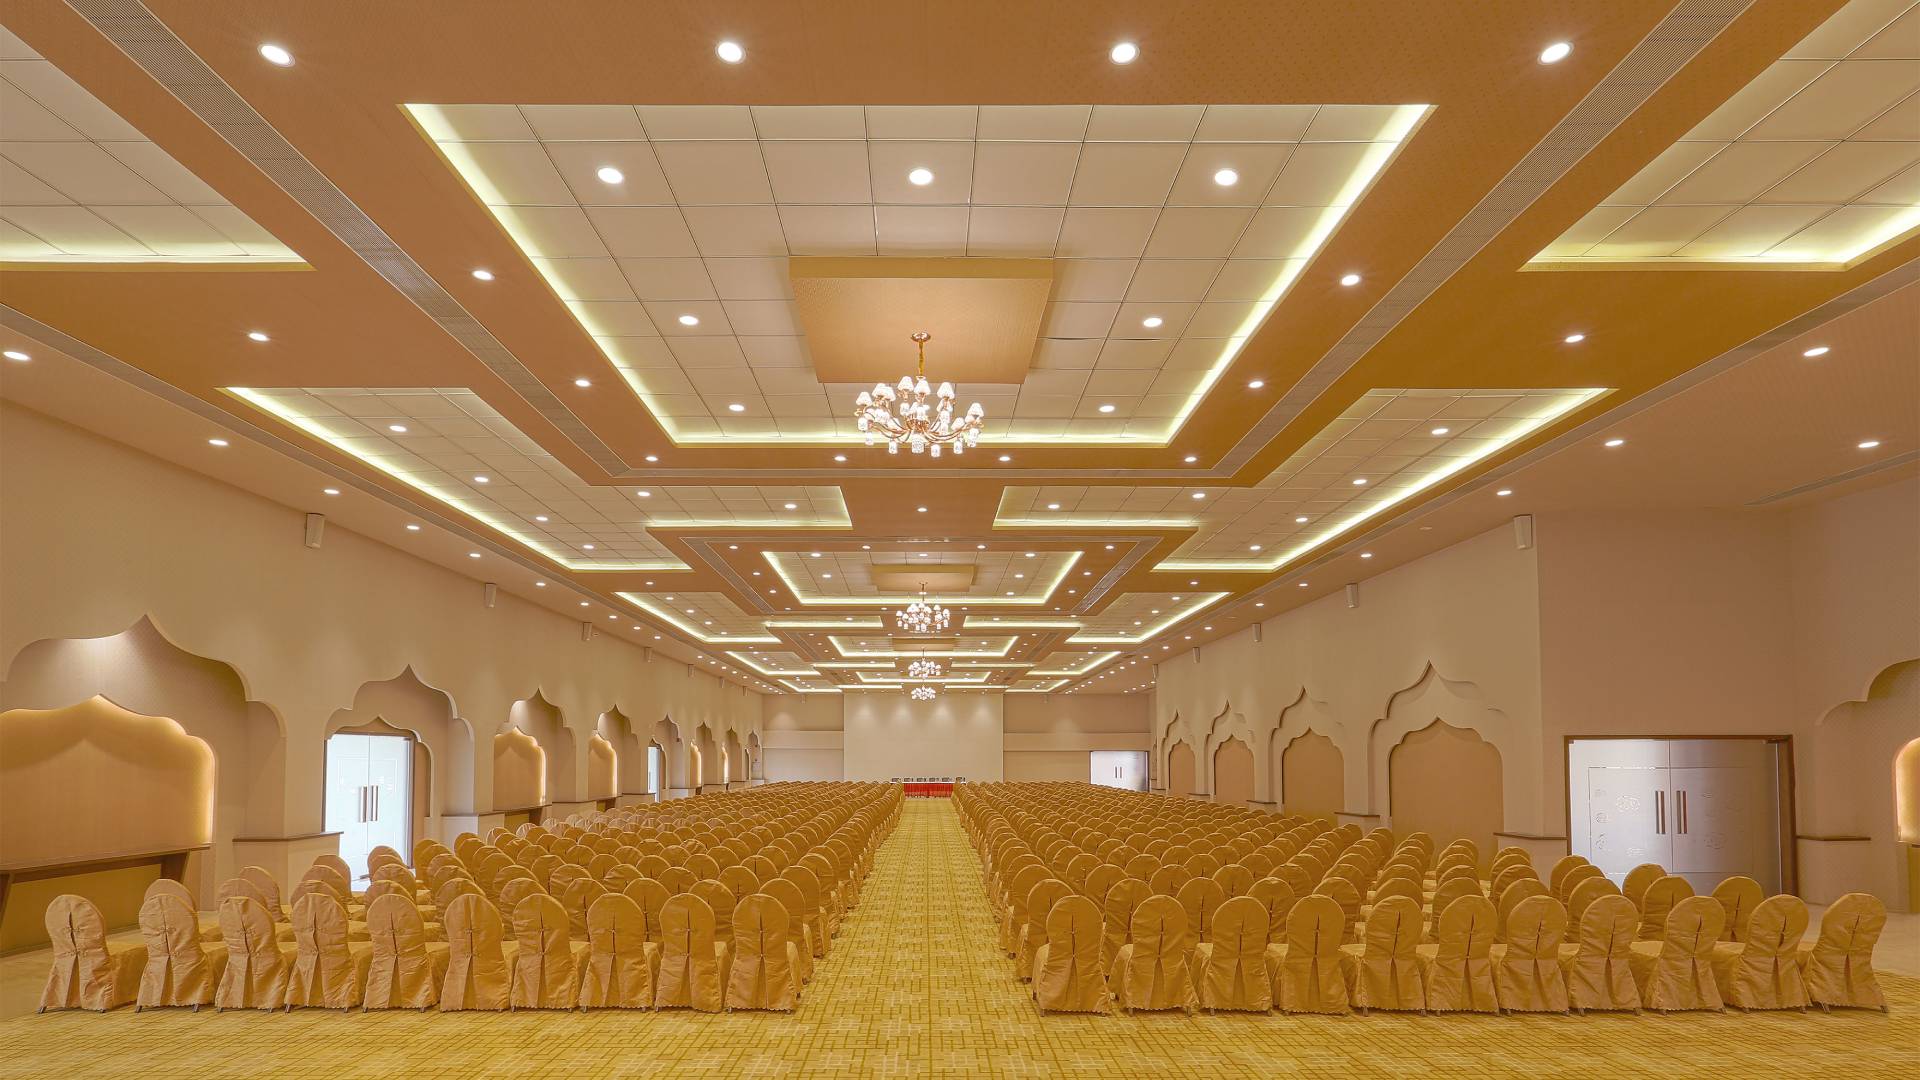 The Kohinoor - Ac Banquet Hall at Sunny's World Pune (1)